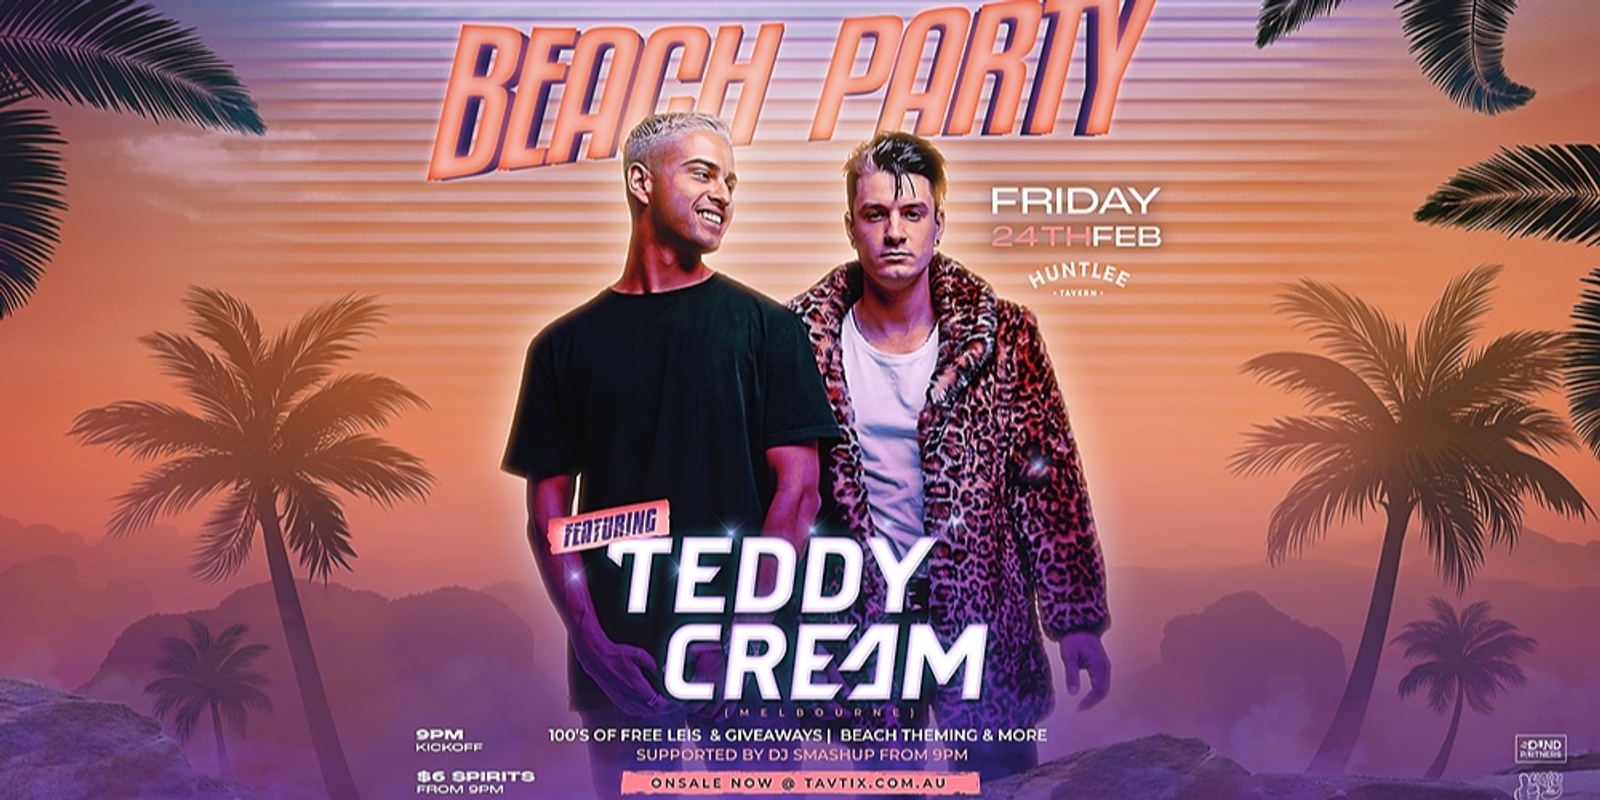 Banner image for Beach Party Feat Teddy Cream